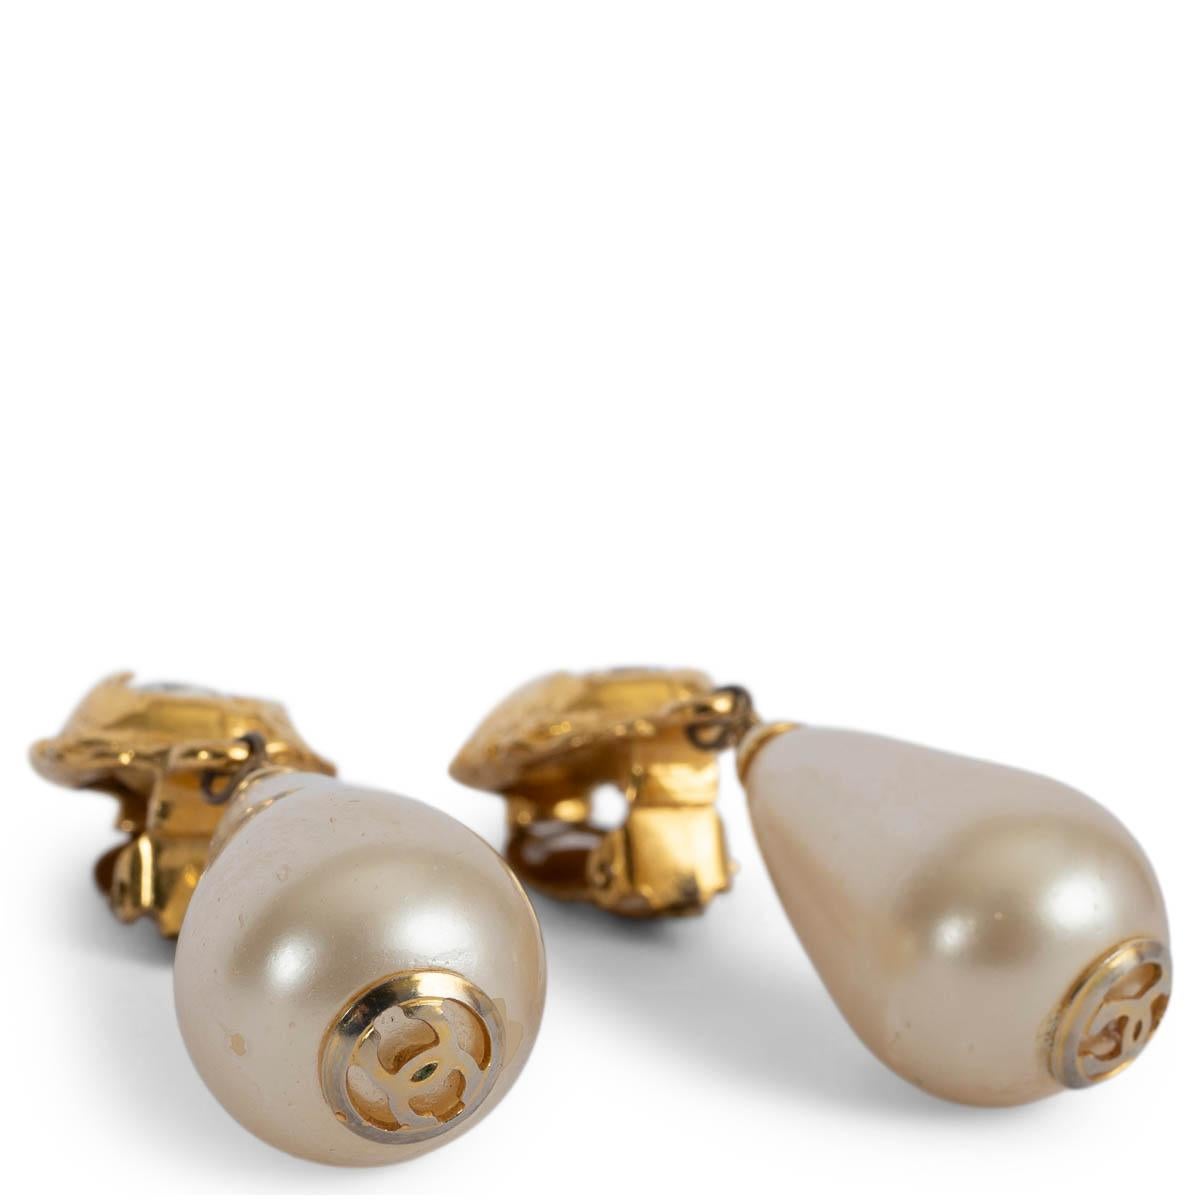 100% authentic Chanel Vintage drop faux pearl clip-on earrings embellished with a chunky crystal and gold-tone metal. Have been worn and show some wear to the faux pearls. Overall in very good condition. Come witn box and dust bag.